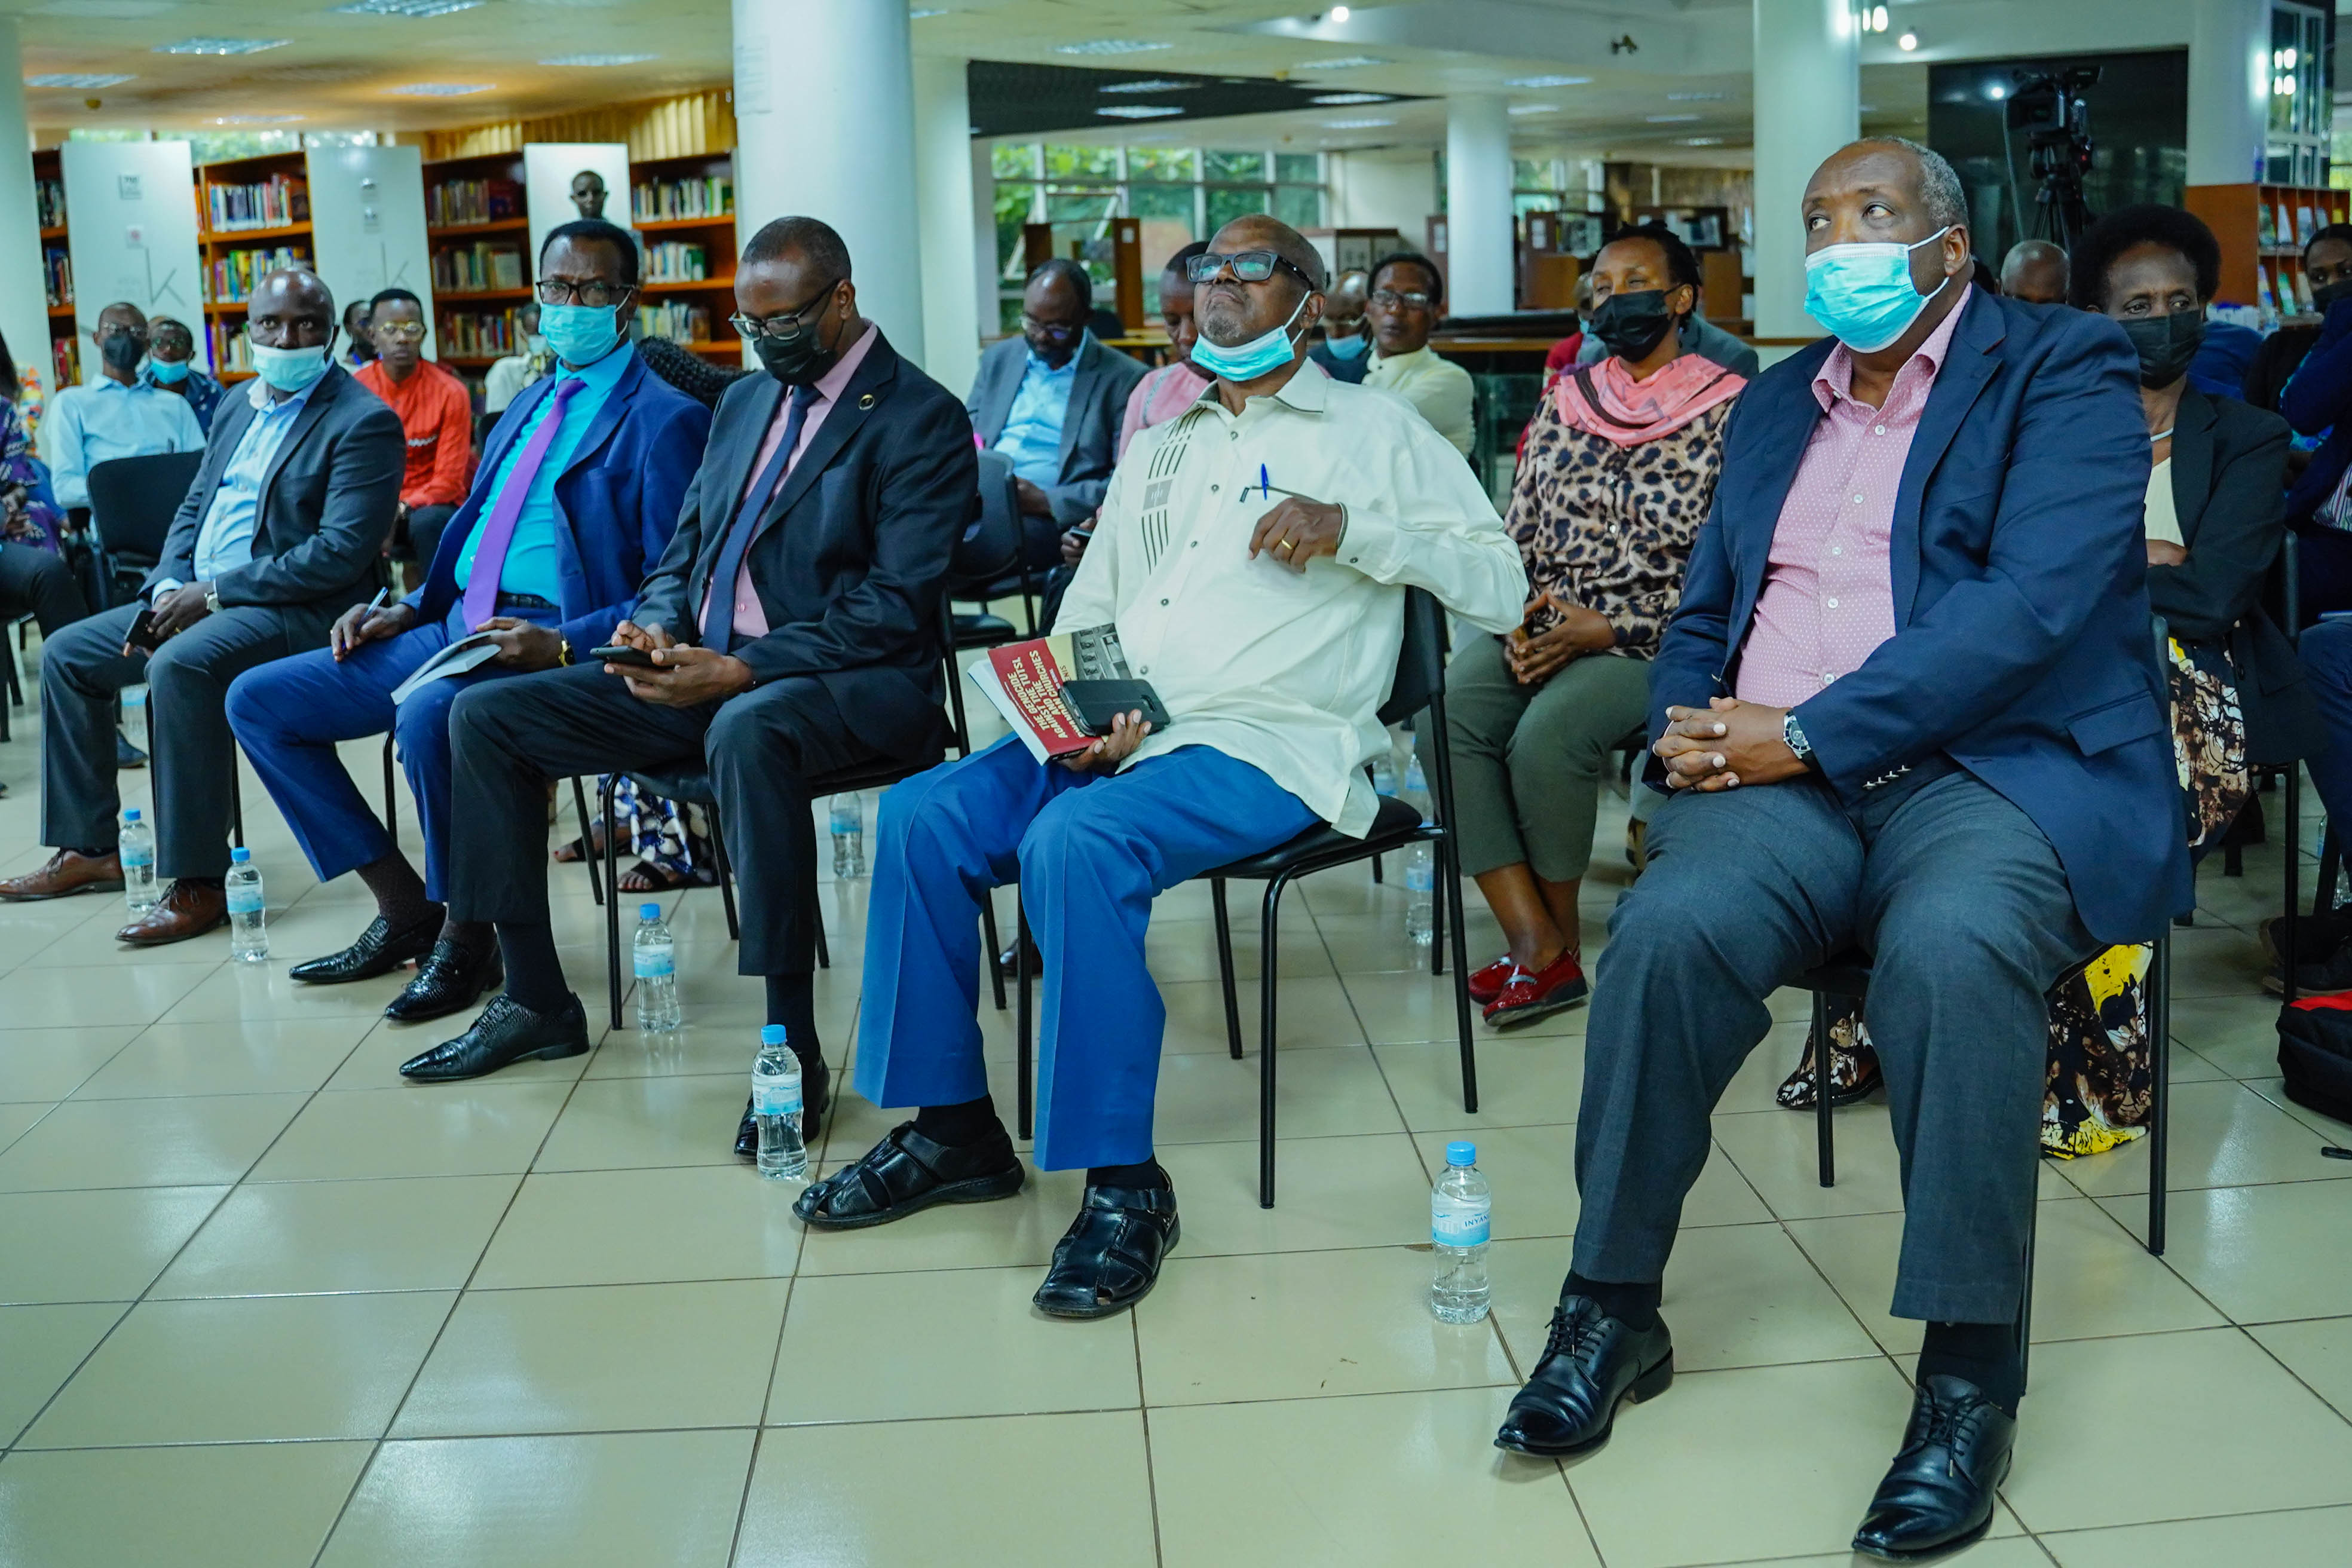 The launch was attended by different officials including Minister Bizimana took place at Kigali Library on May 6.